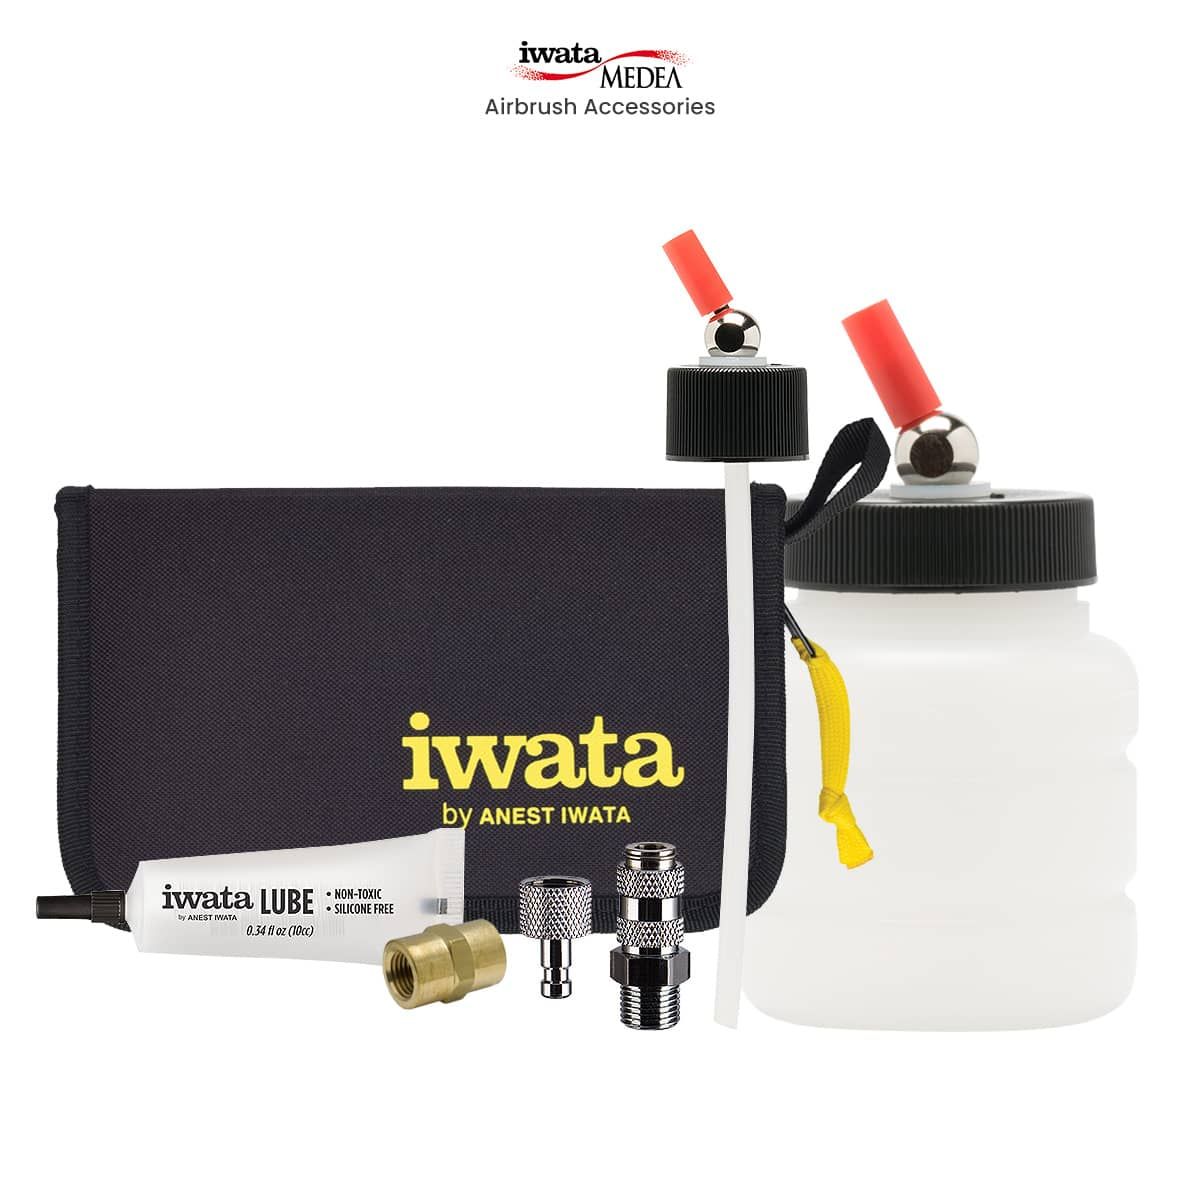 Iwata Air Hoses and Air Hose Fittings from GraphicAir